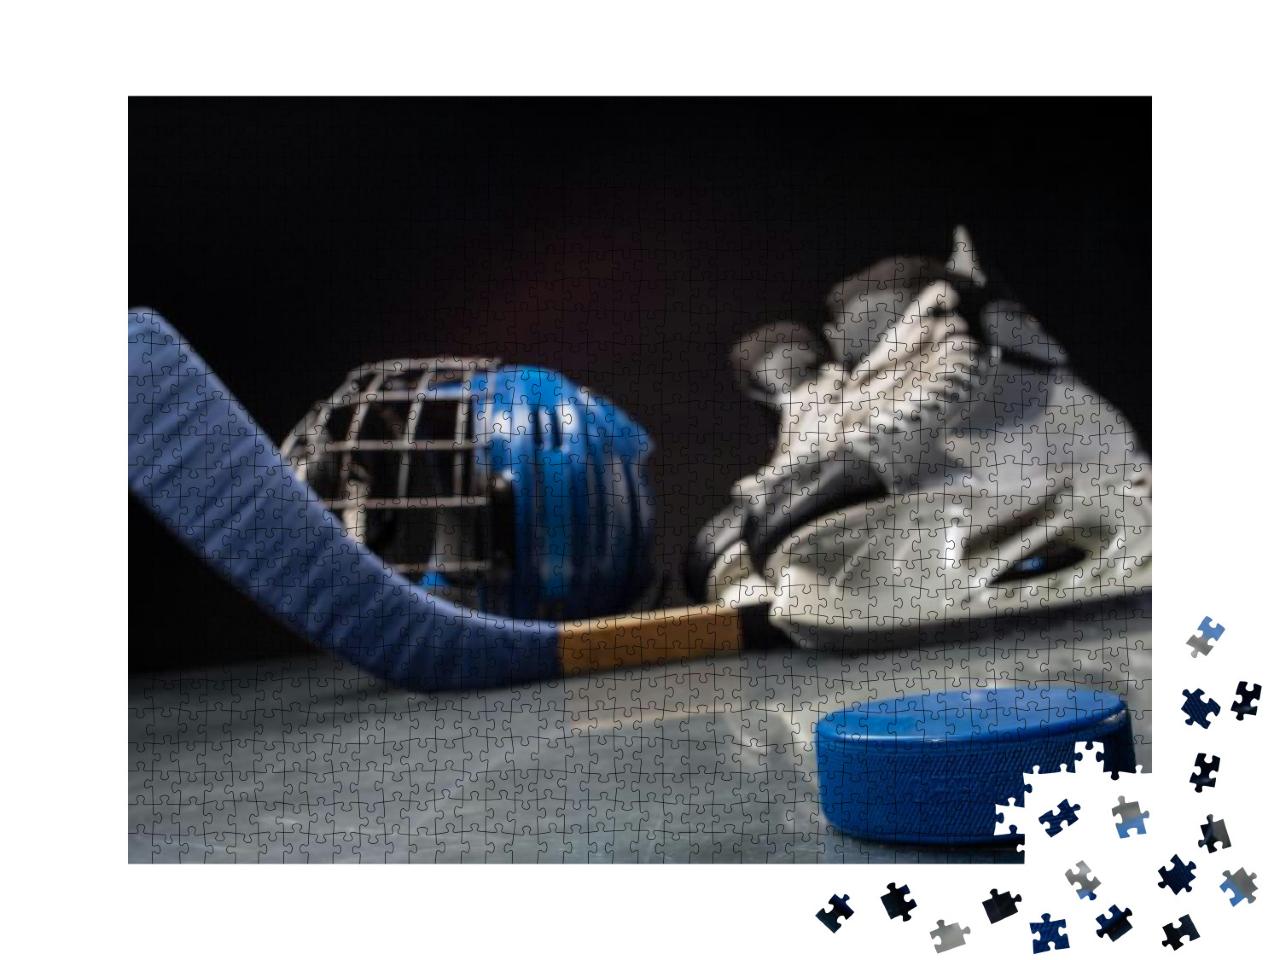 Close-Up on Hockey Puck & Hockey Equipment in Background... Jigsaw Puzzle with 1000 pieces